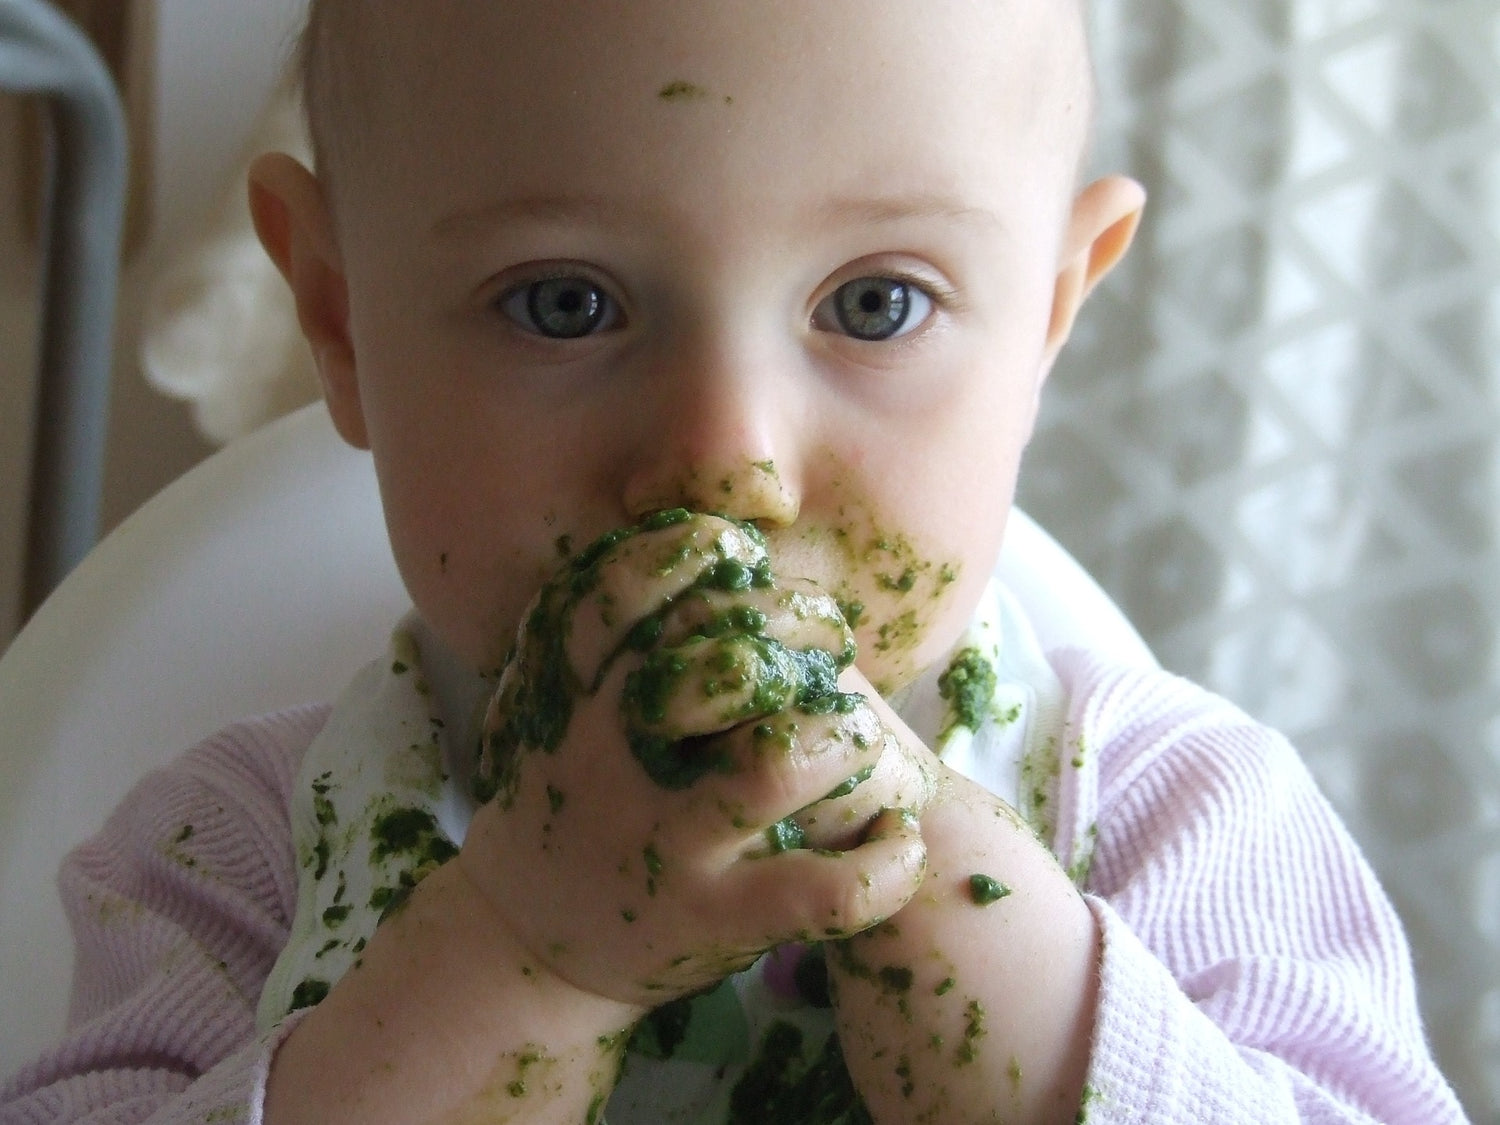 Tastes textures and flavours - the exciting stages of weaning